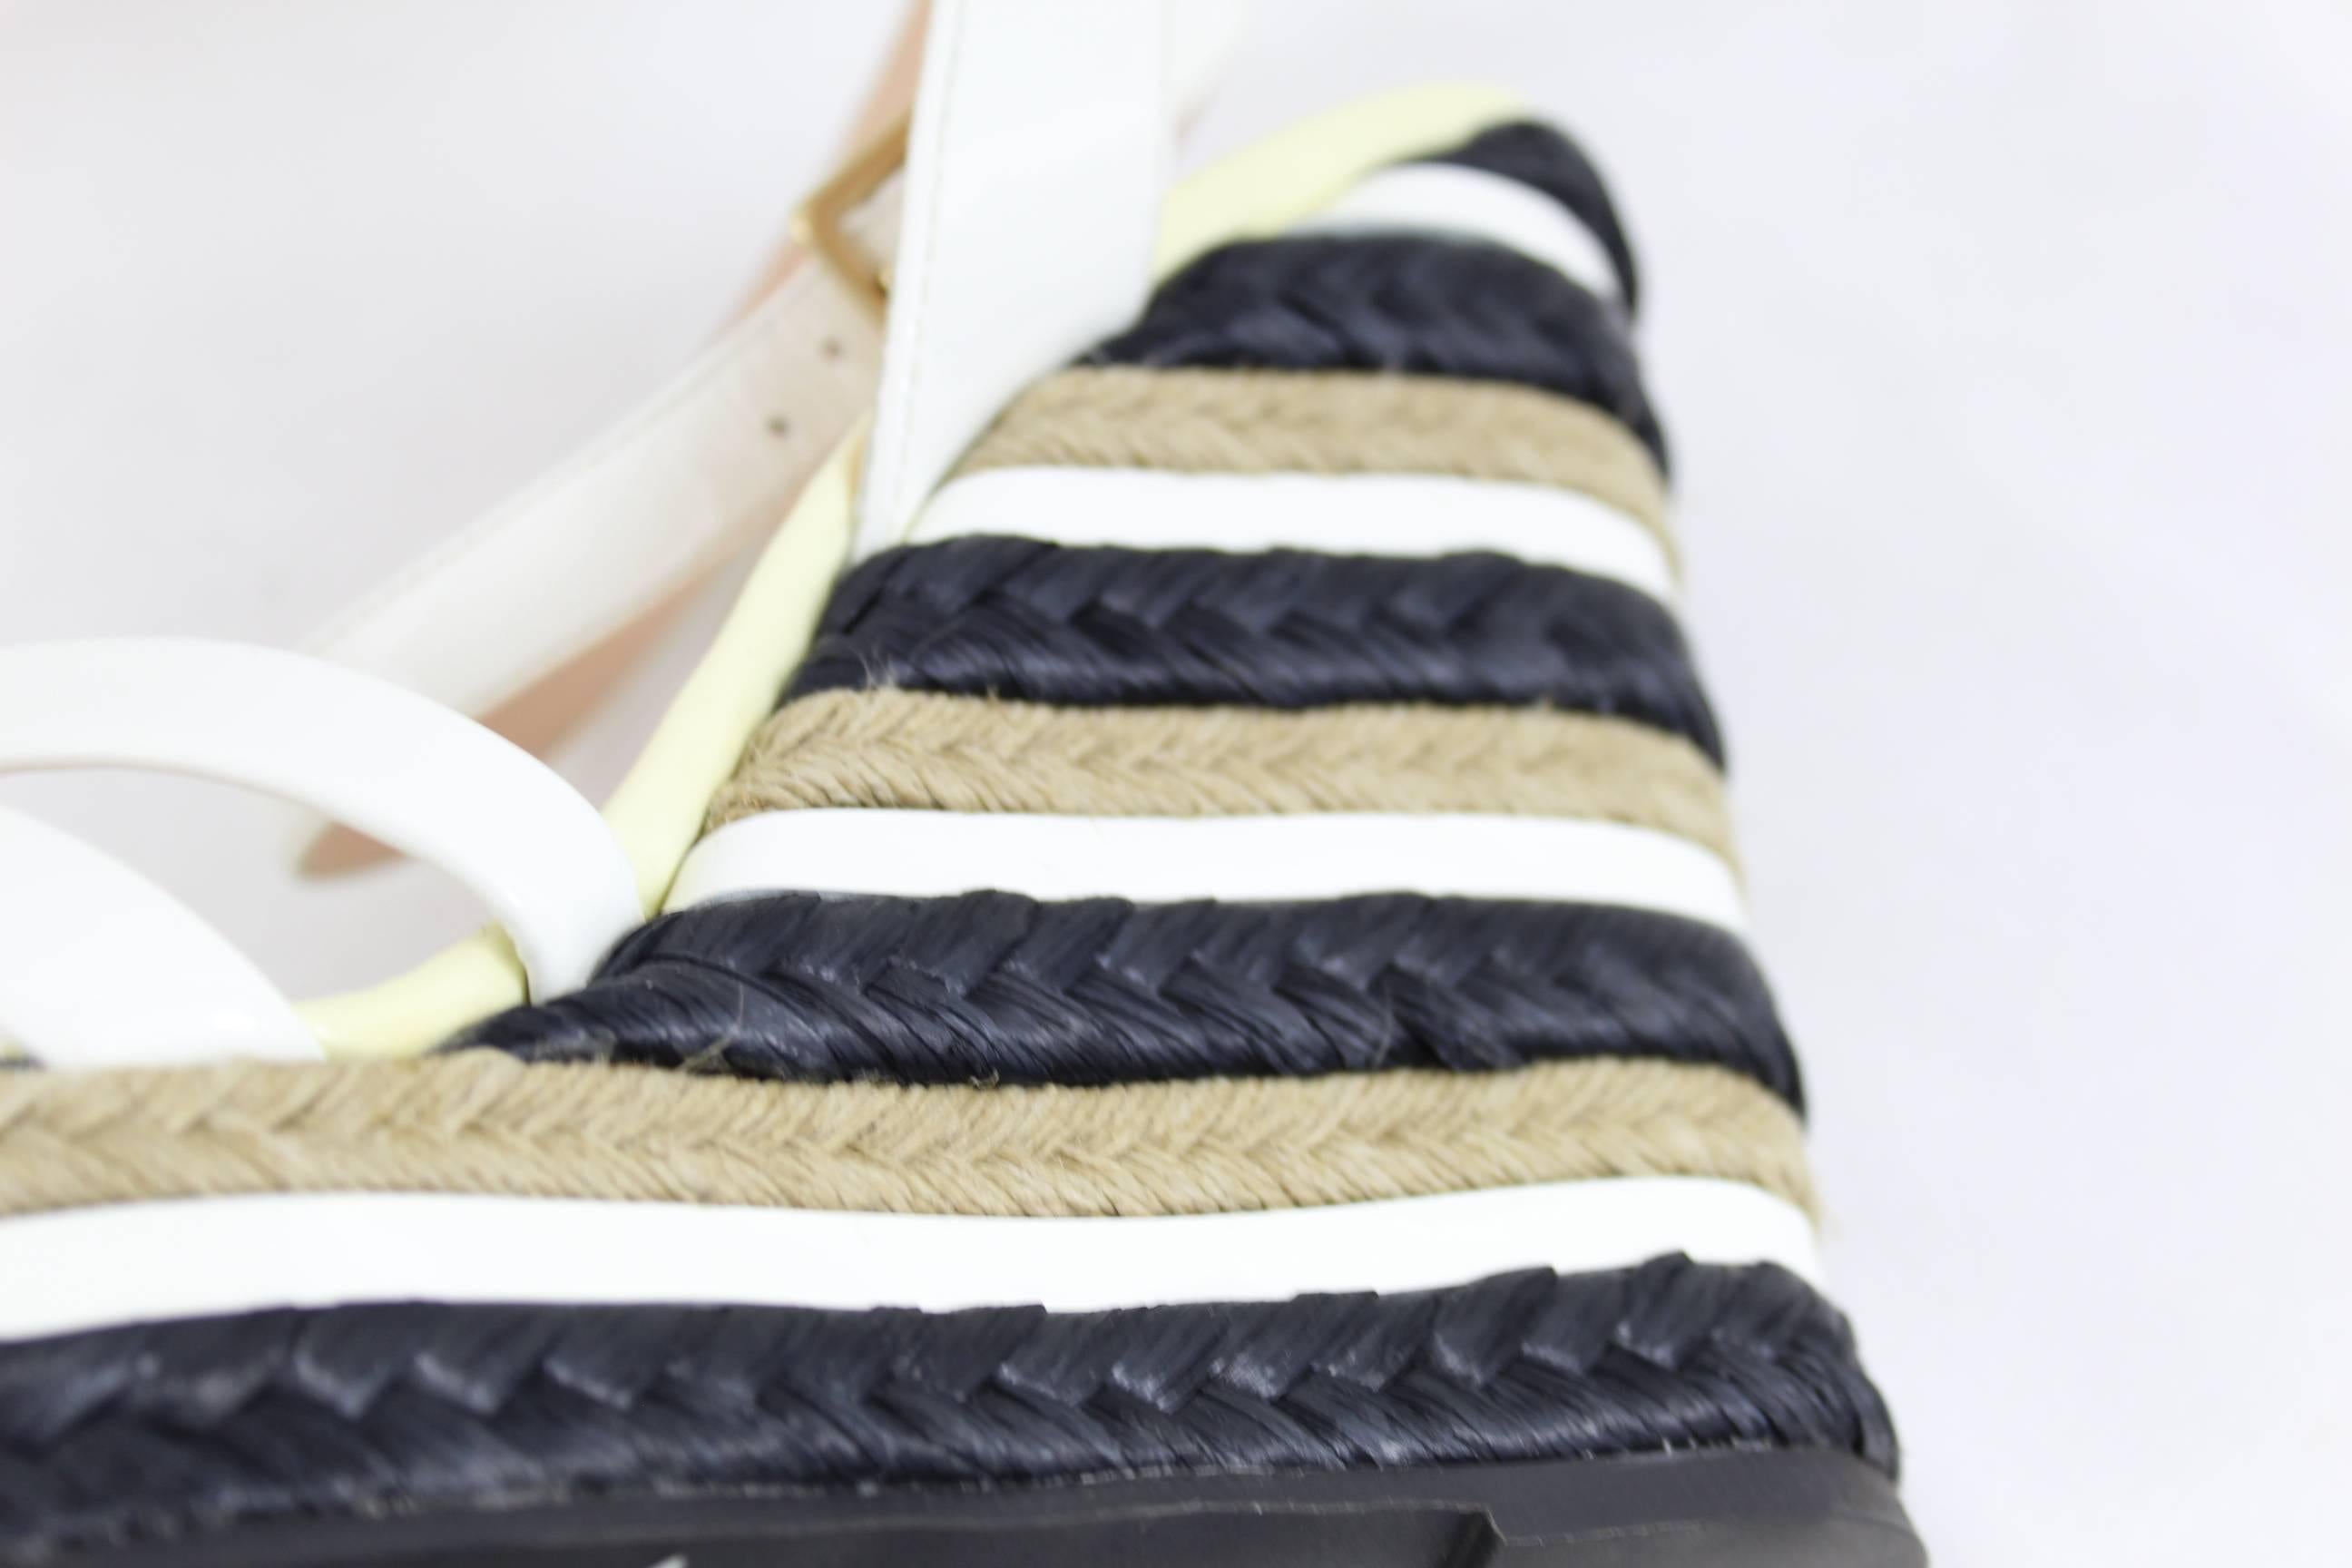 Like new Versace black and White espadrilles. Size 38